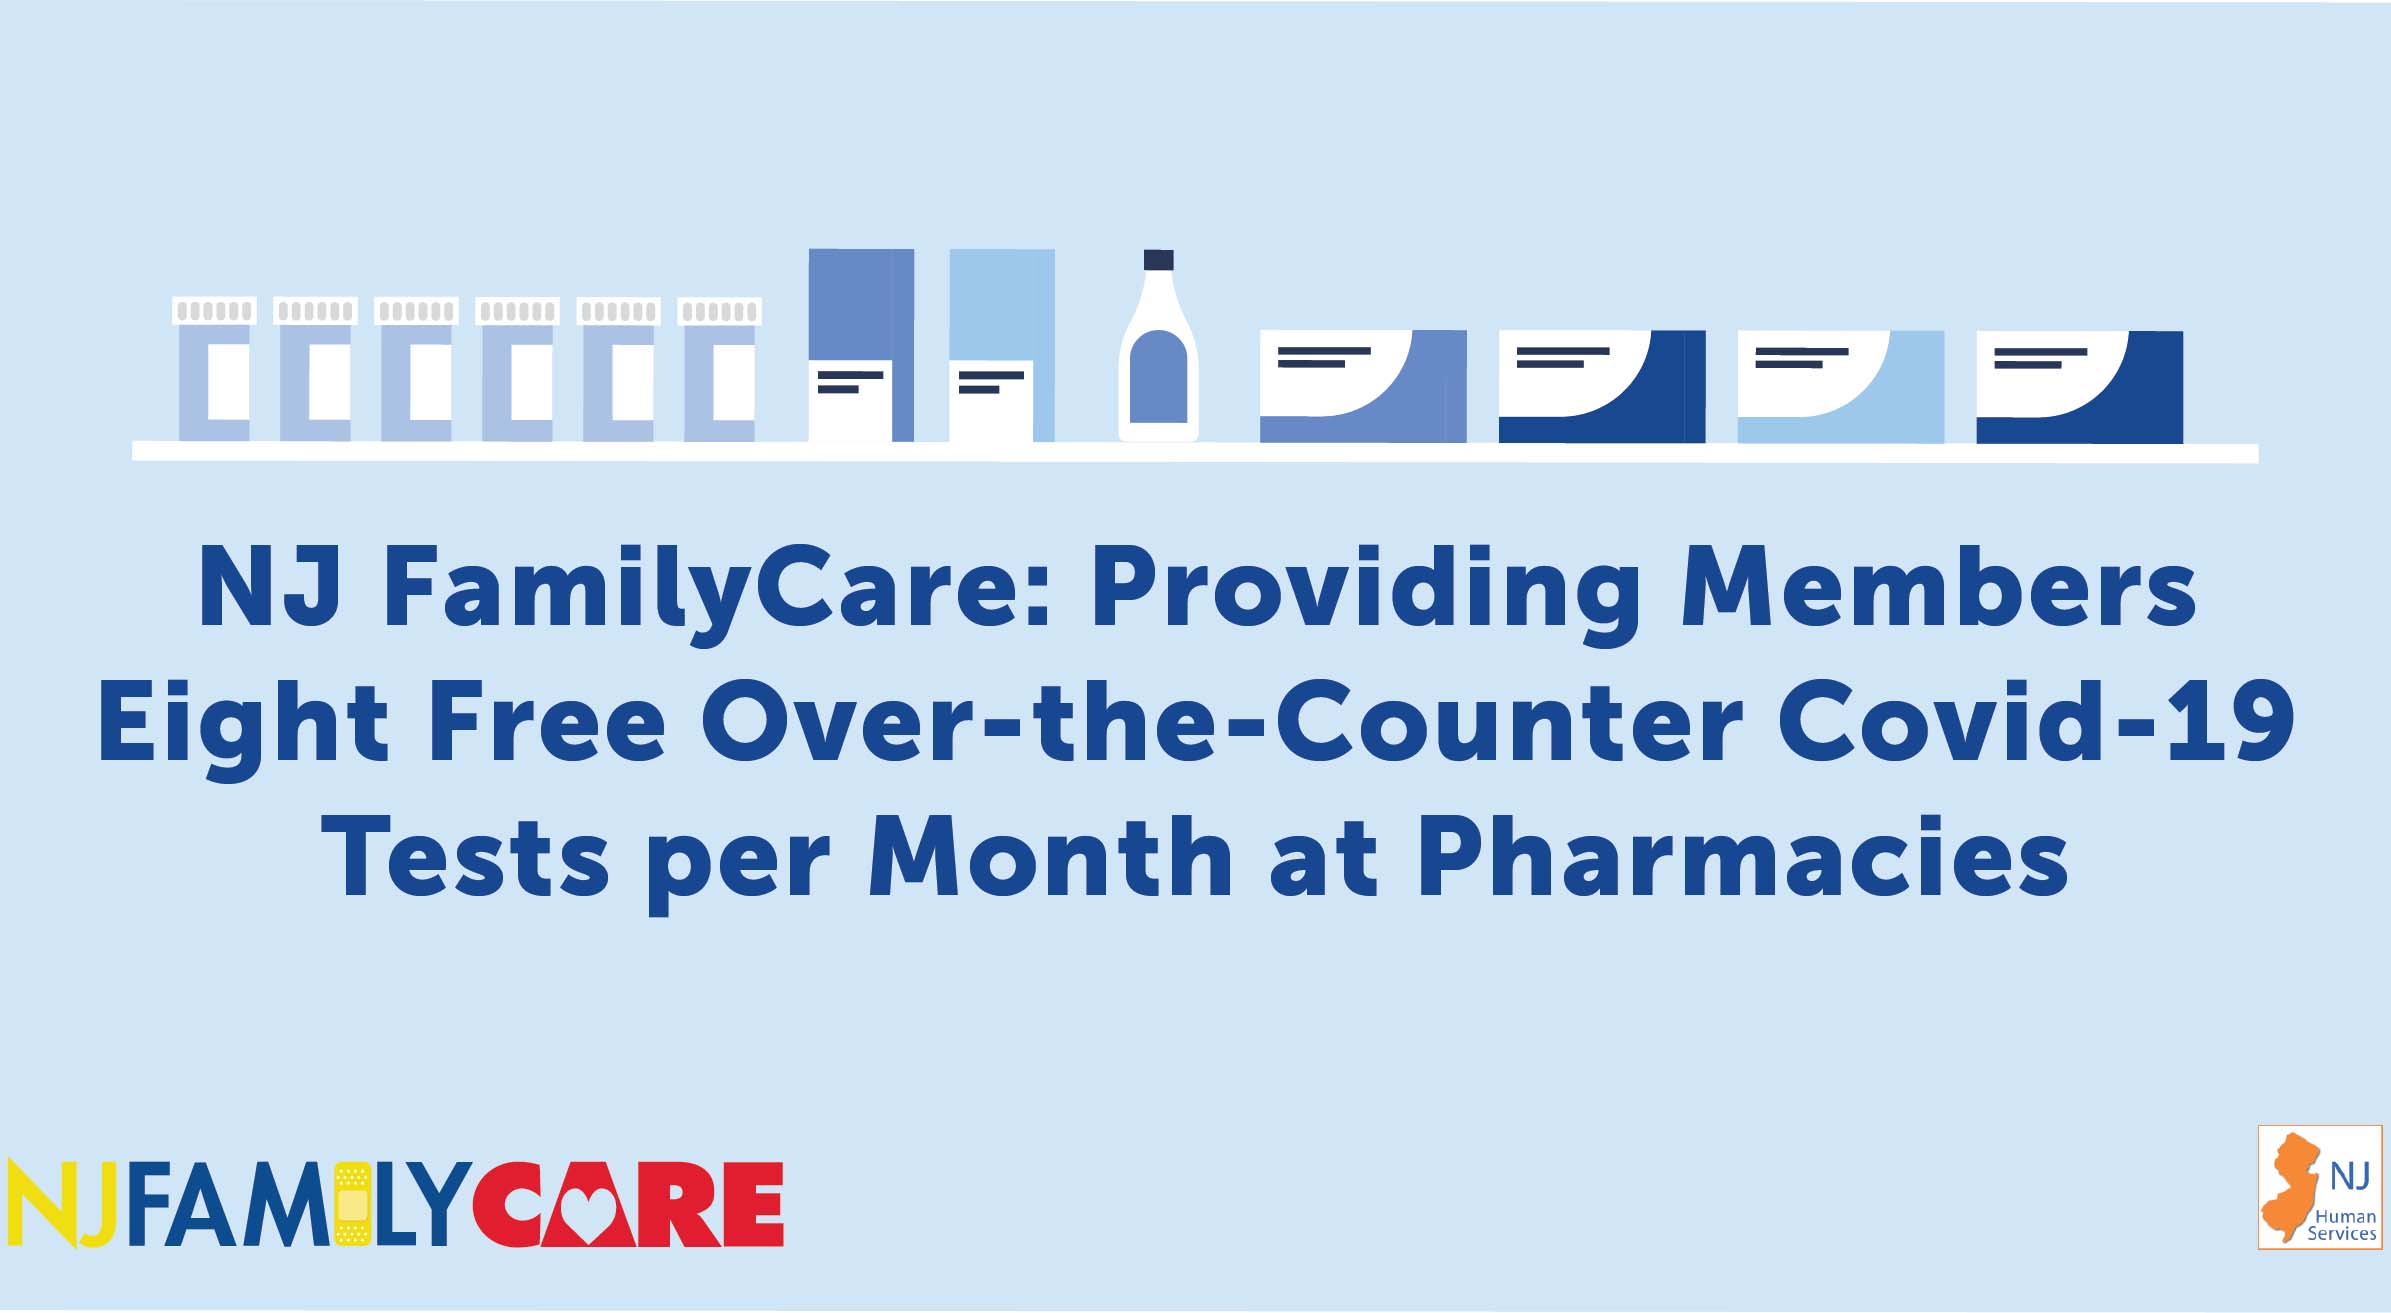 NJFamilyCare Providing 8 Free Monthly Over-the-Counter COVID Tests